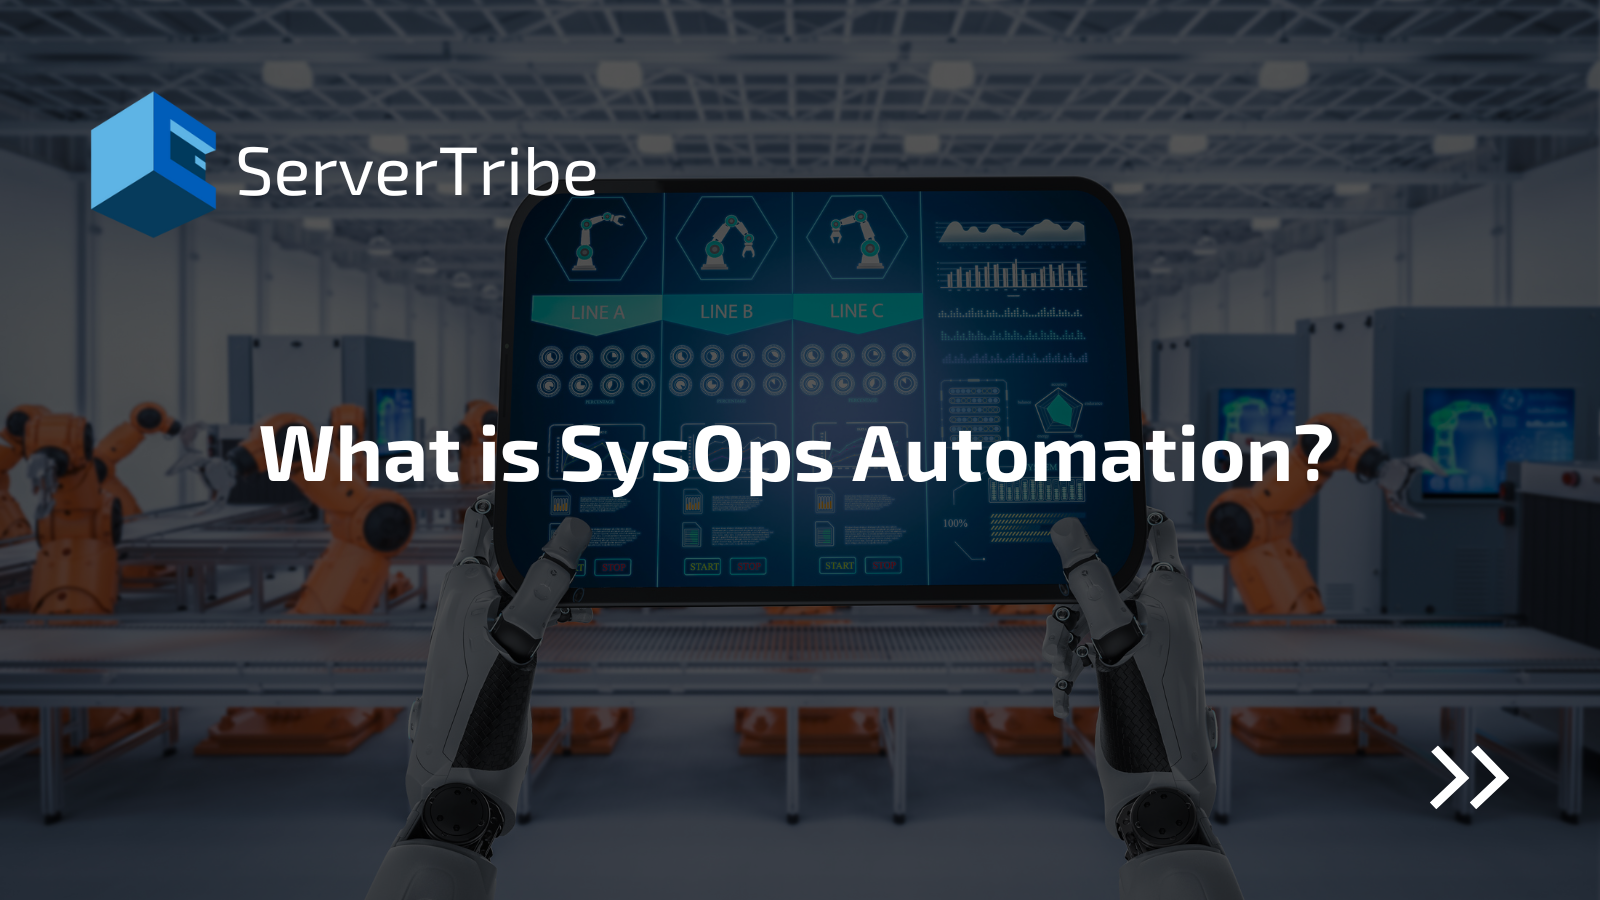 SysOps Automation